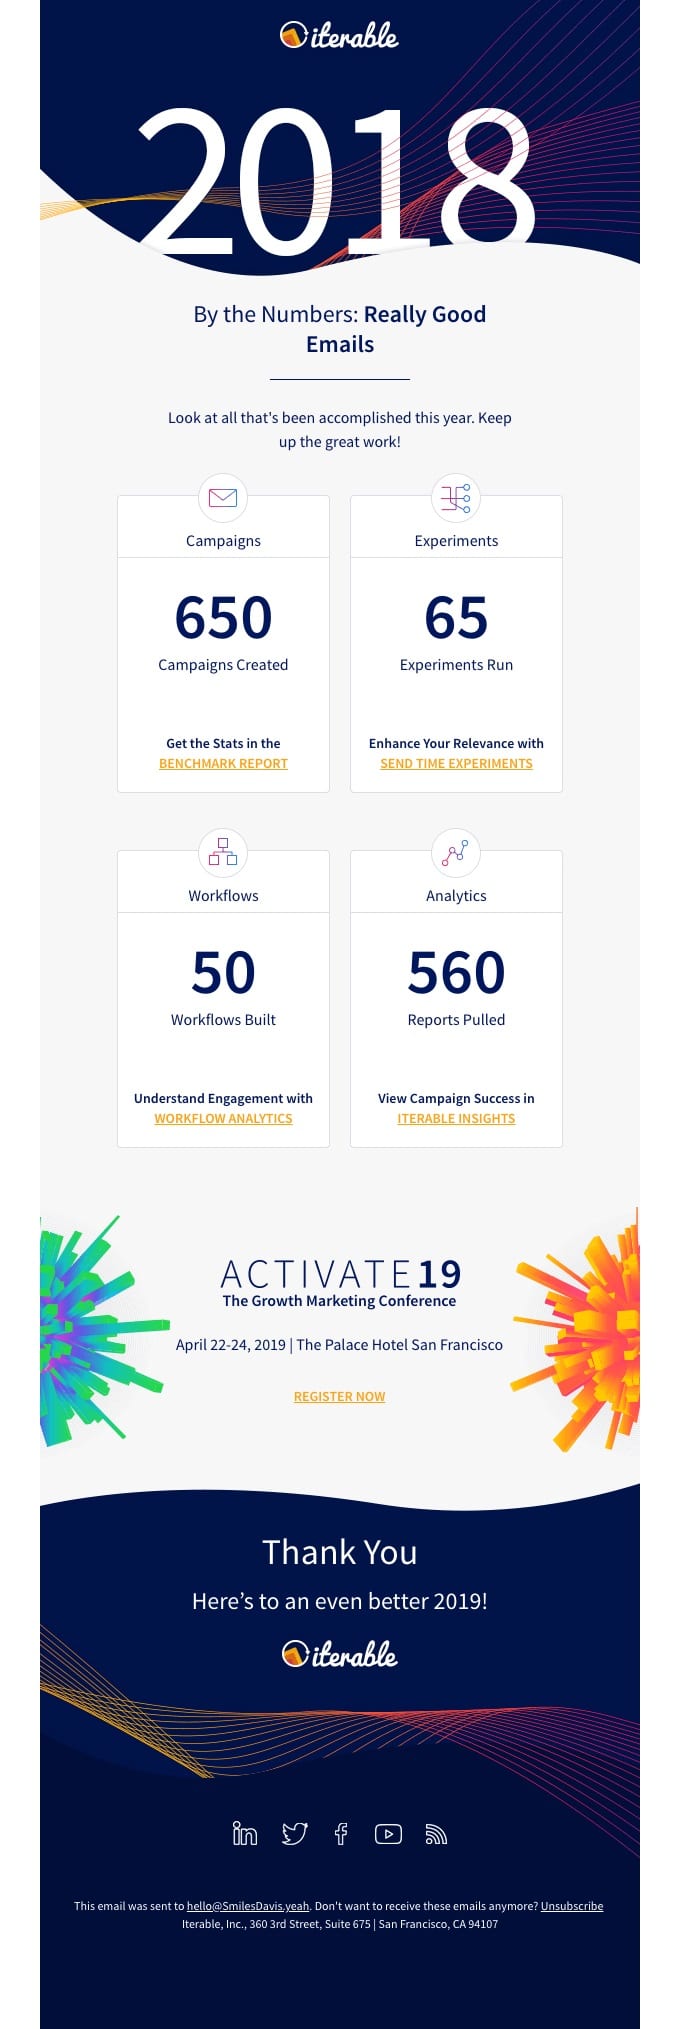 Take this example from Iterable. They kept track of a variety of different accomplishments of this brand and send it as a year-end milestone campaign.